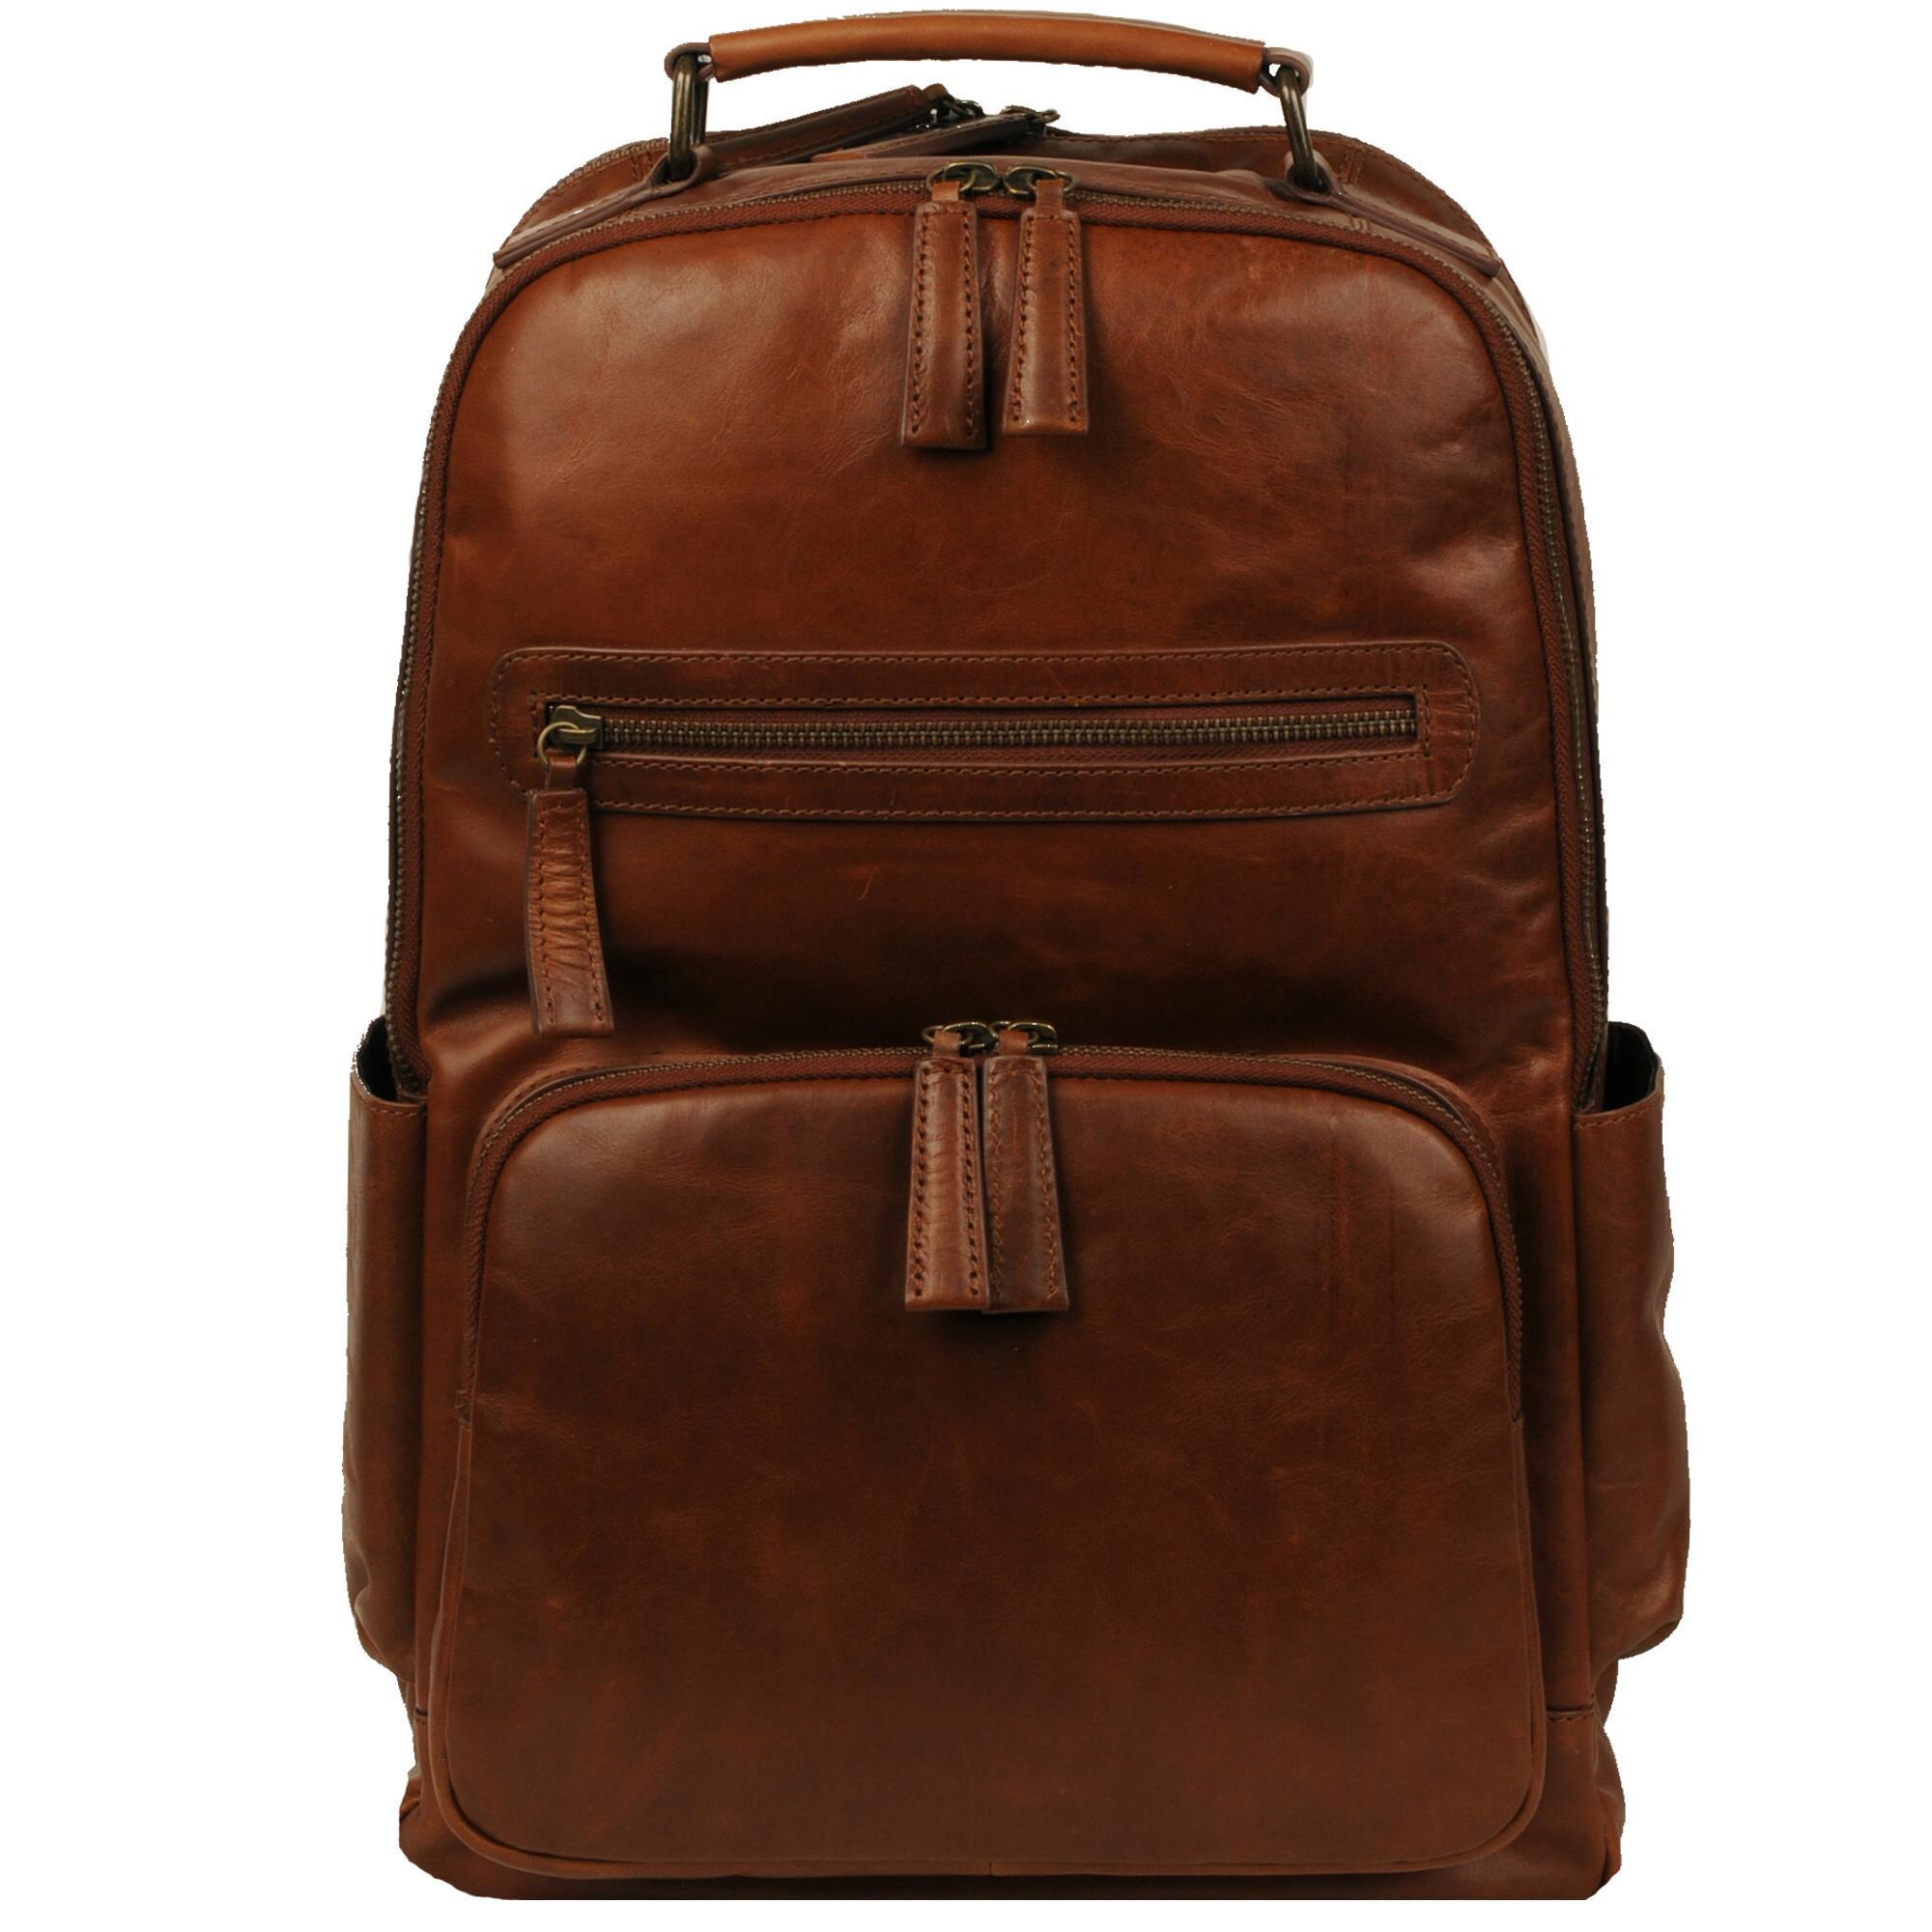 Wilsons Leather Vintage Leather Crunch Backpack in Brown for Men - Lyst